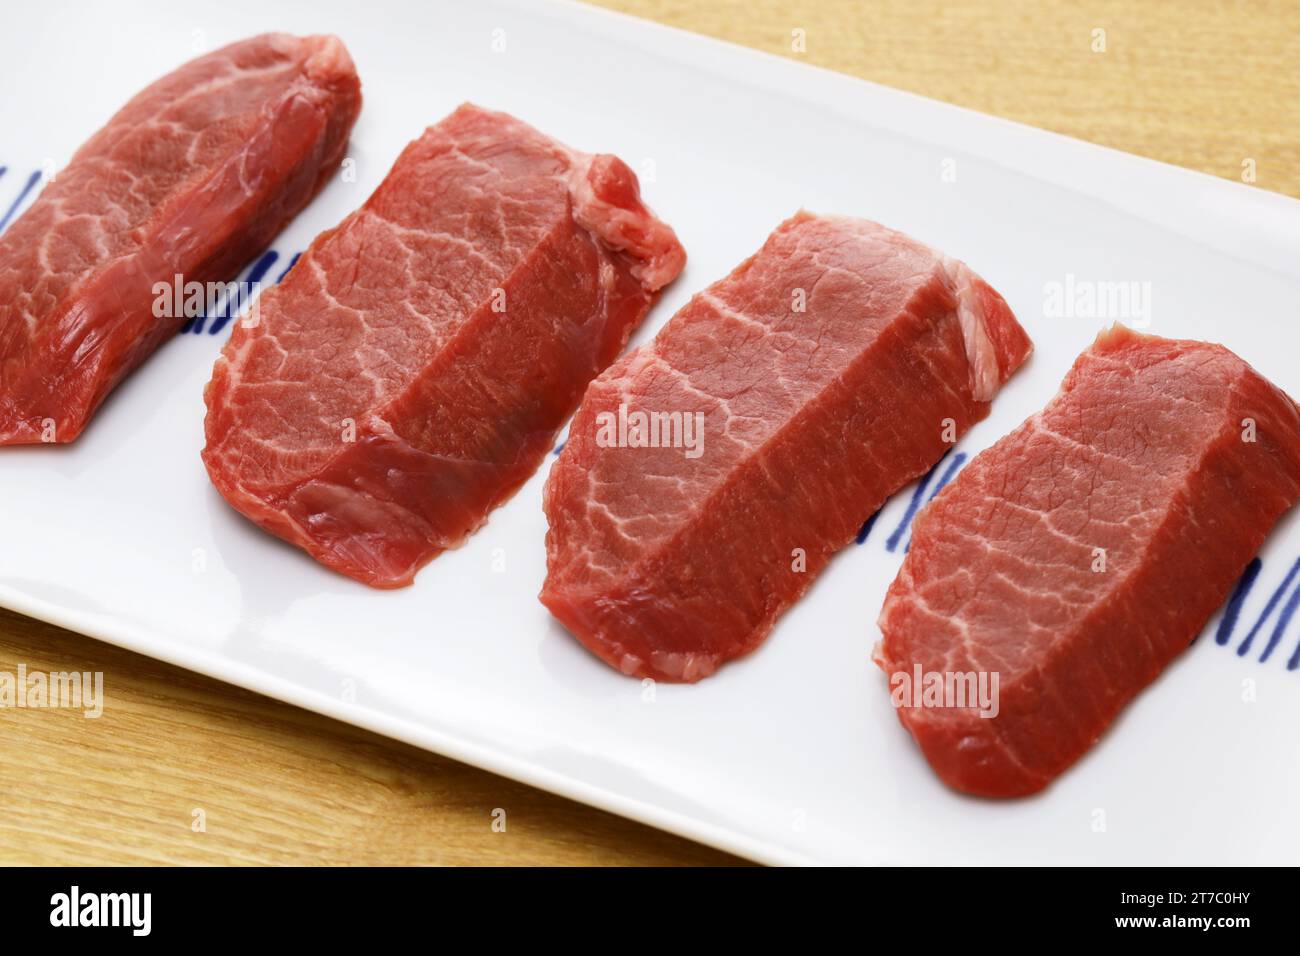 A rare cut of beef called 'necktie' in Japan. Japanese Yakiniku(grilled meat) ingredients. Stock Photo